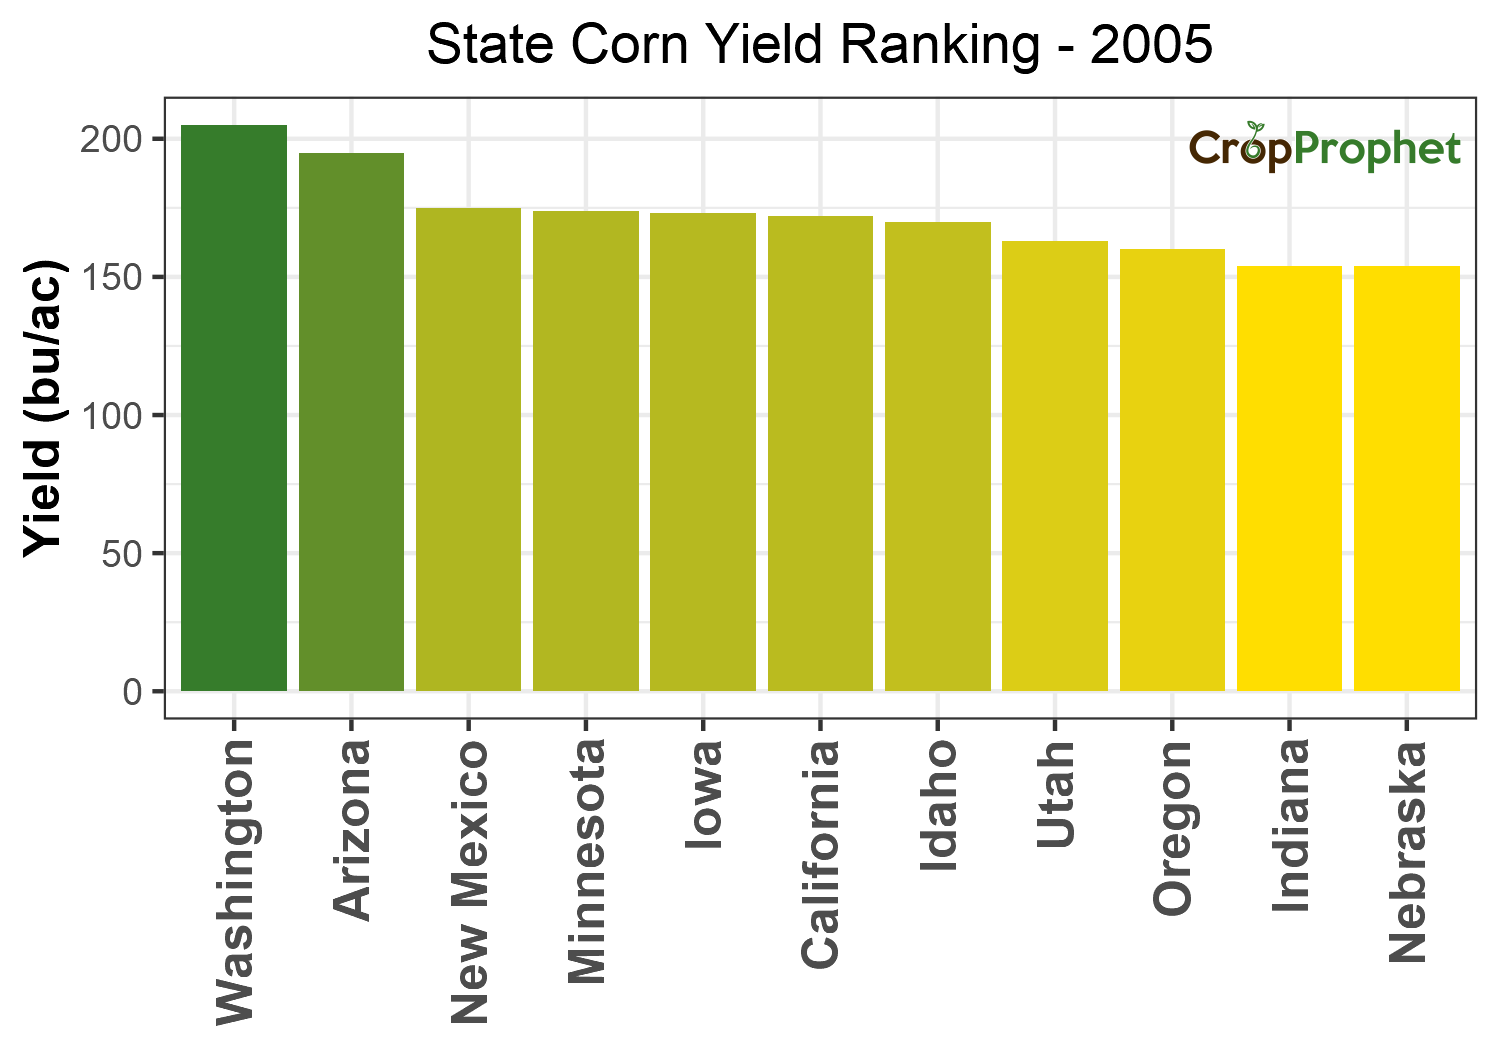 Corn Production by State - 2005 Rankings